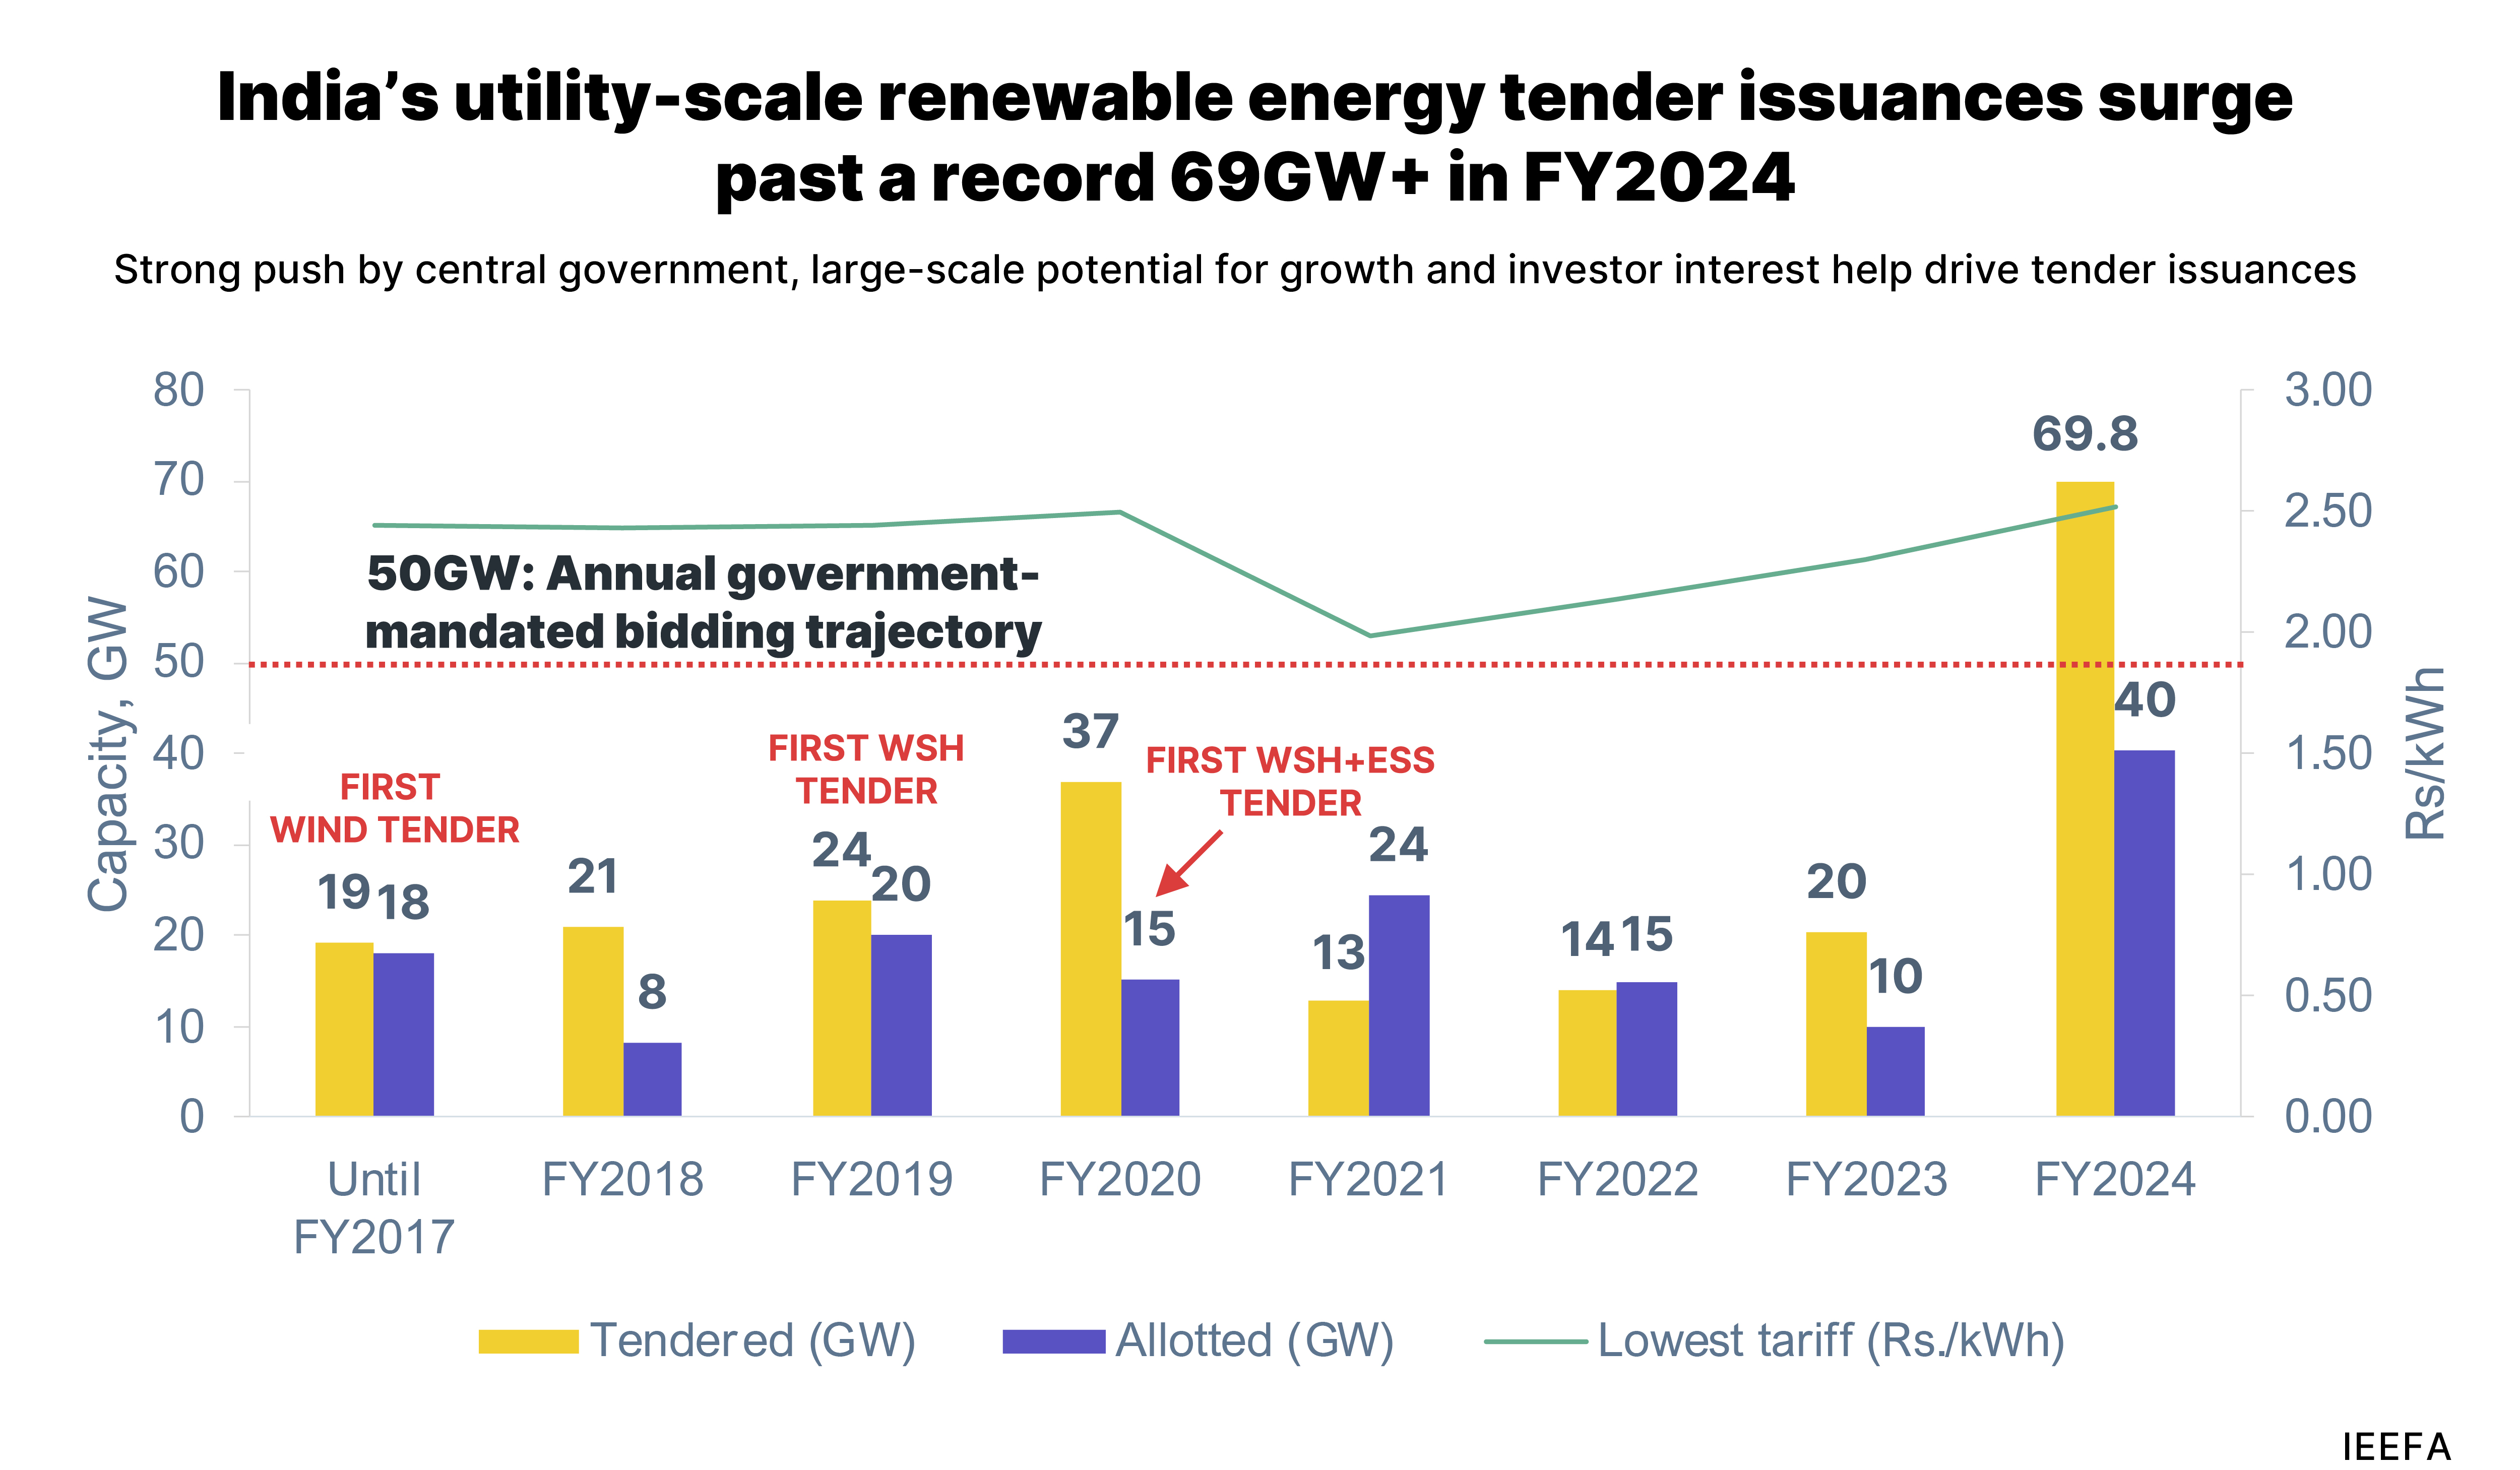 Renewable energy tender issuance trends in India